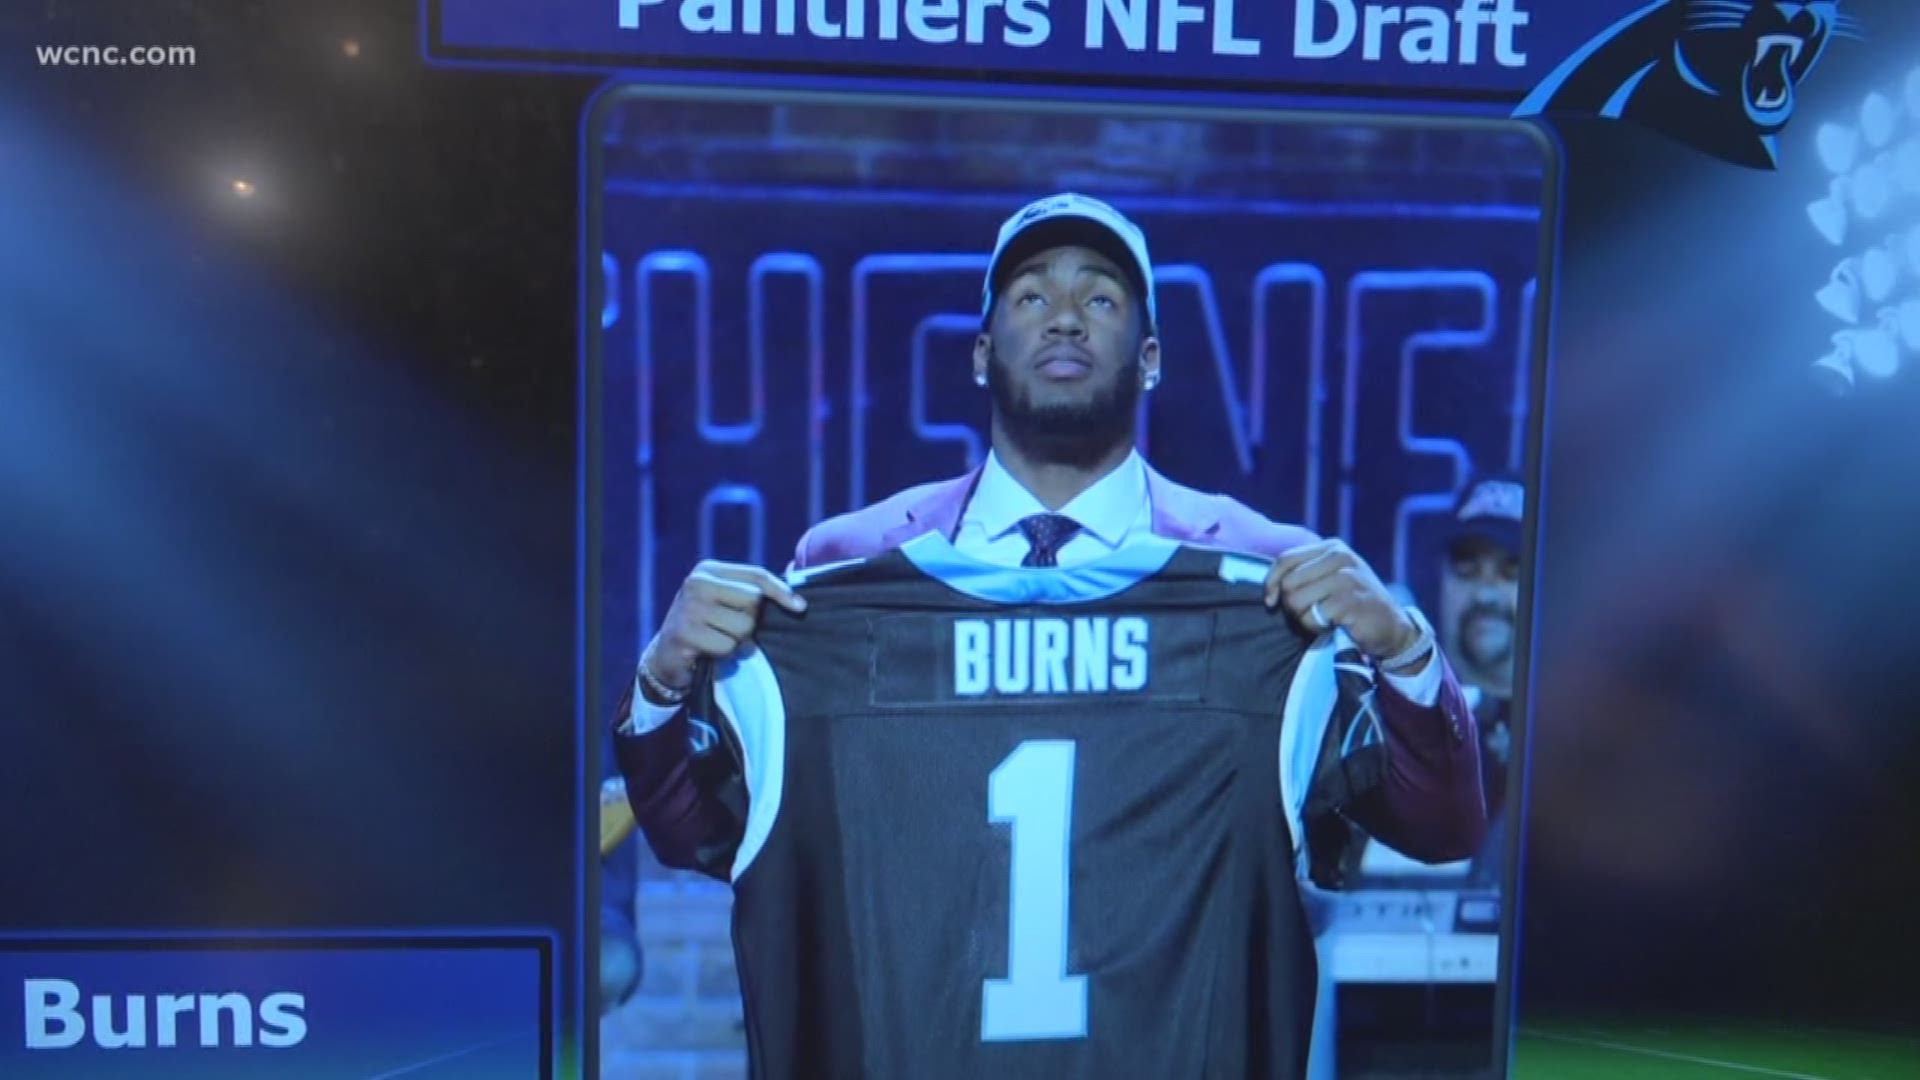 The Carolina Panthers added a key piece to their defense with the selection of Brian Burns in the first round of the NFL Draft. Burns is expected to replace the retiring Julius Peppers.